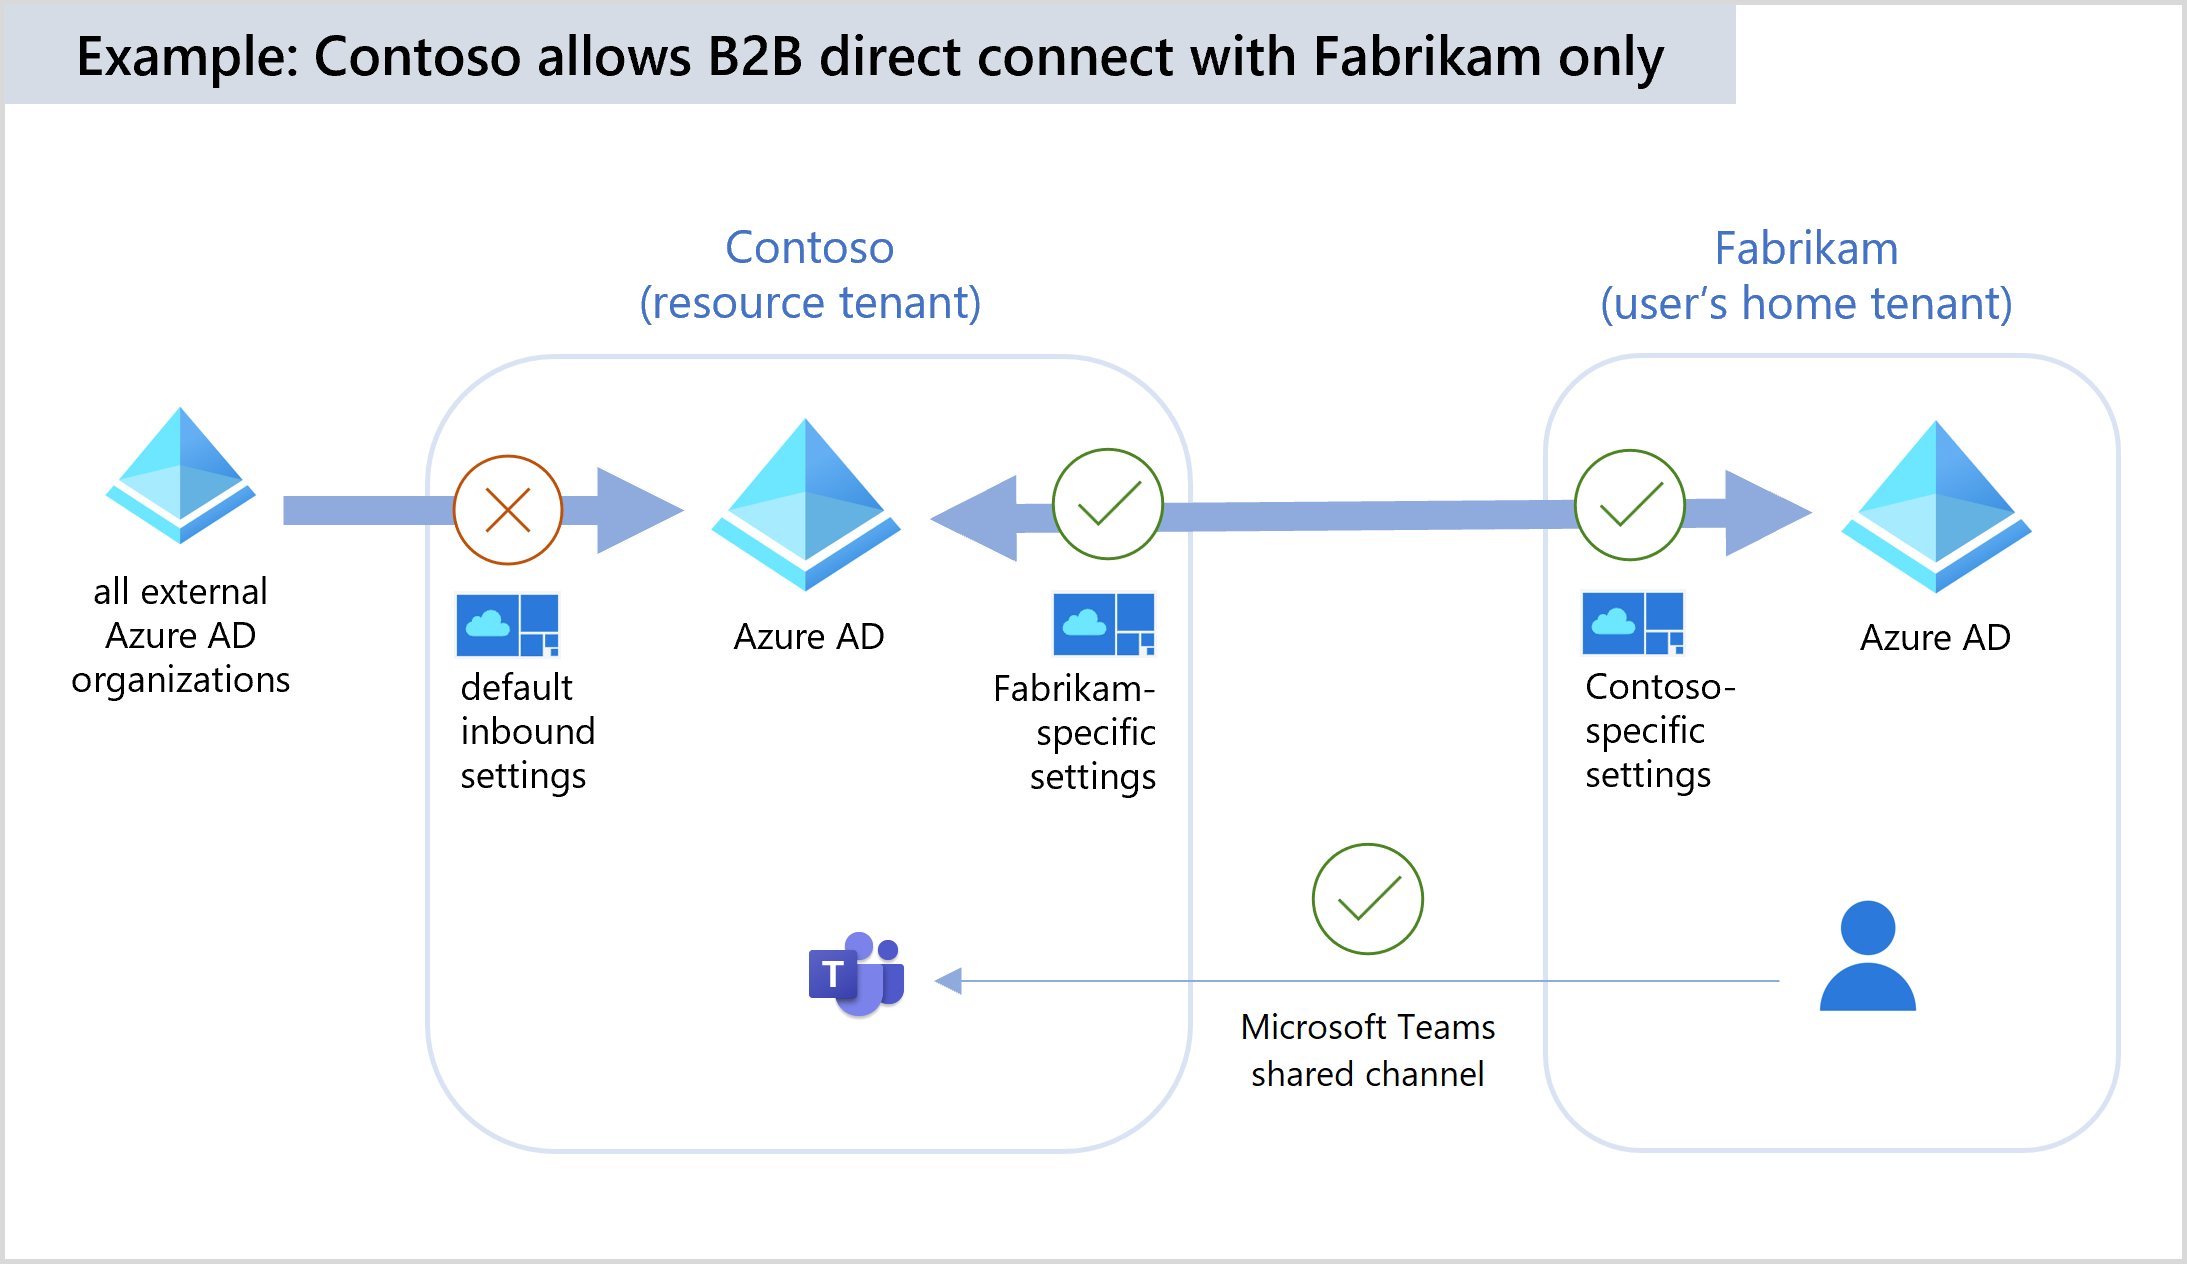 Example of blocking B2B direct connect by default but allowing an org